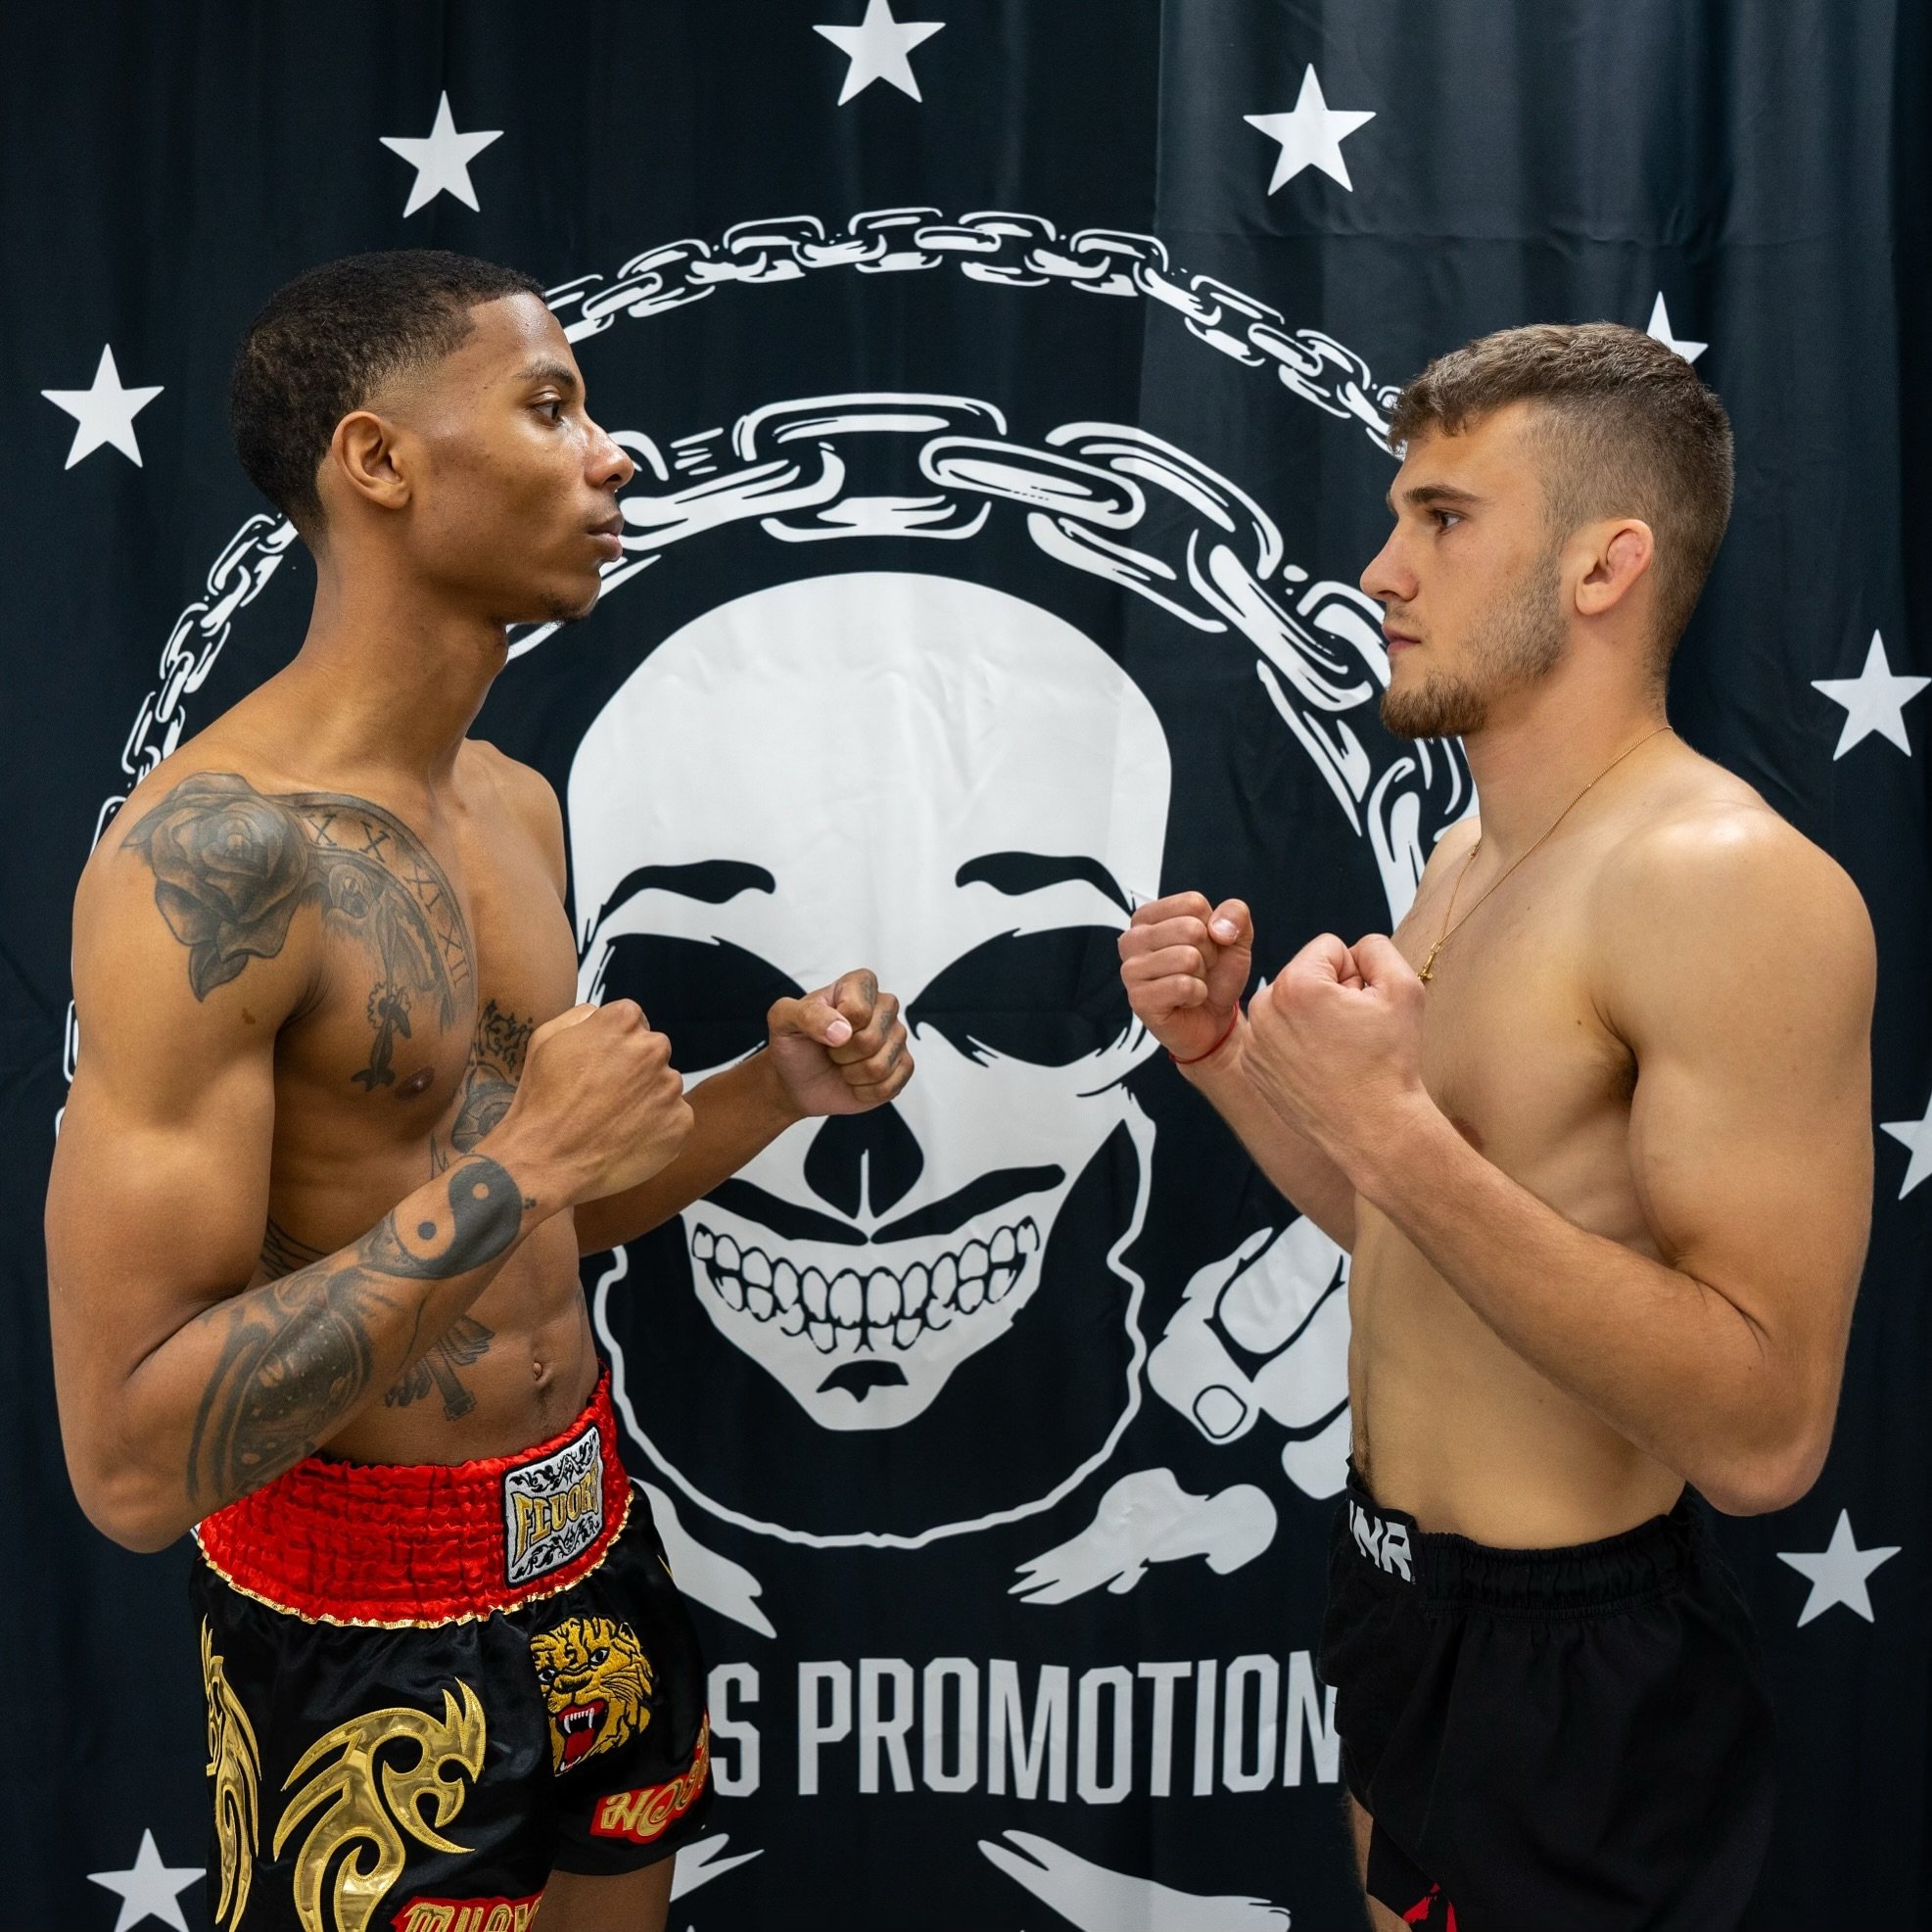 Muay Thai fight 😤
@andersonjamir_ vs @tomovi2 
.
It goes down tonight! Tickets will be available at the door! Can&rsquo;t make it? Order the pay-per-view! Link in bio
Doors open at 5:30pm
Show starts at 6:30pm
.
Venue: The PIAZZA
85 Executive Dr. Au